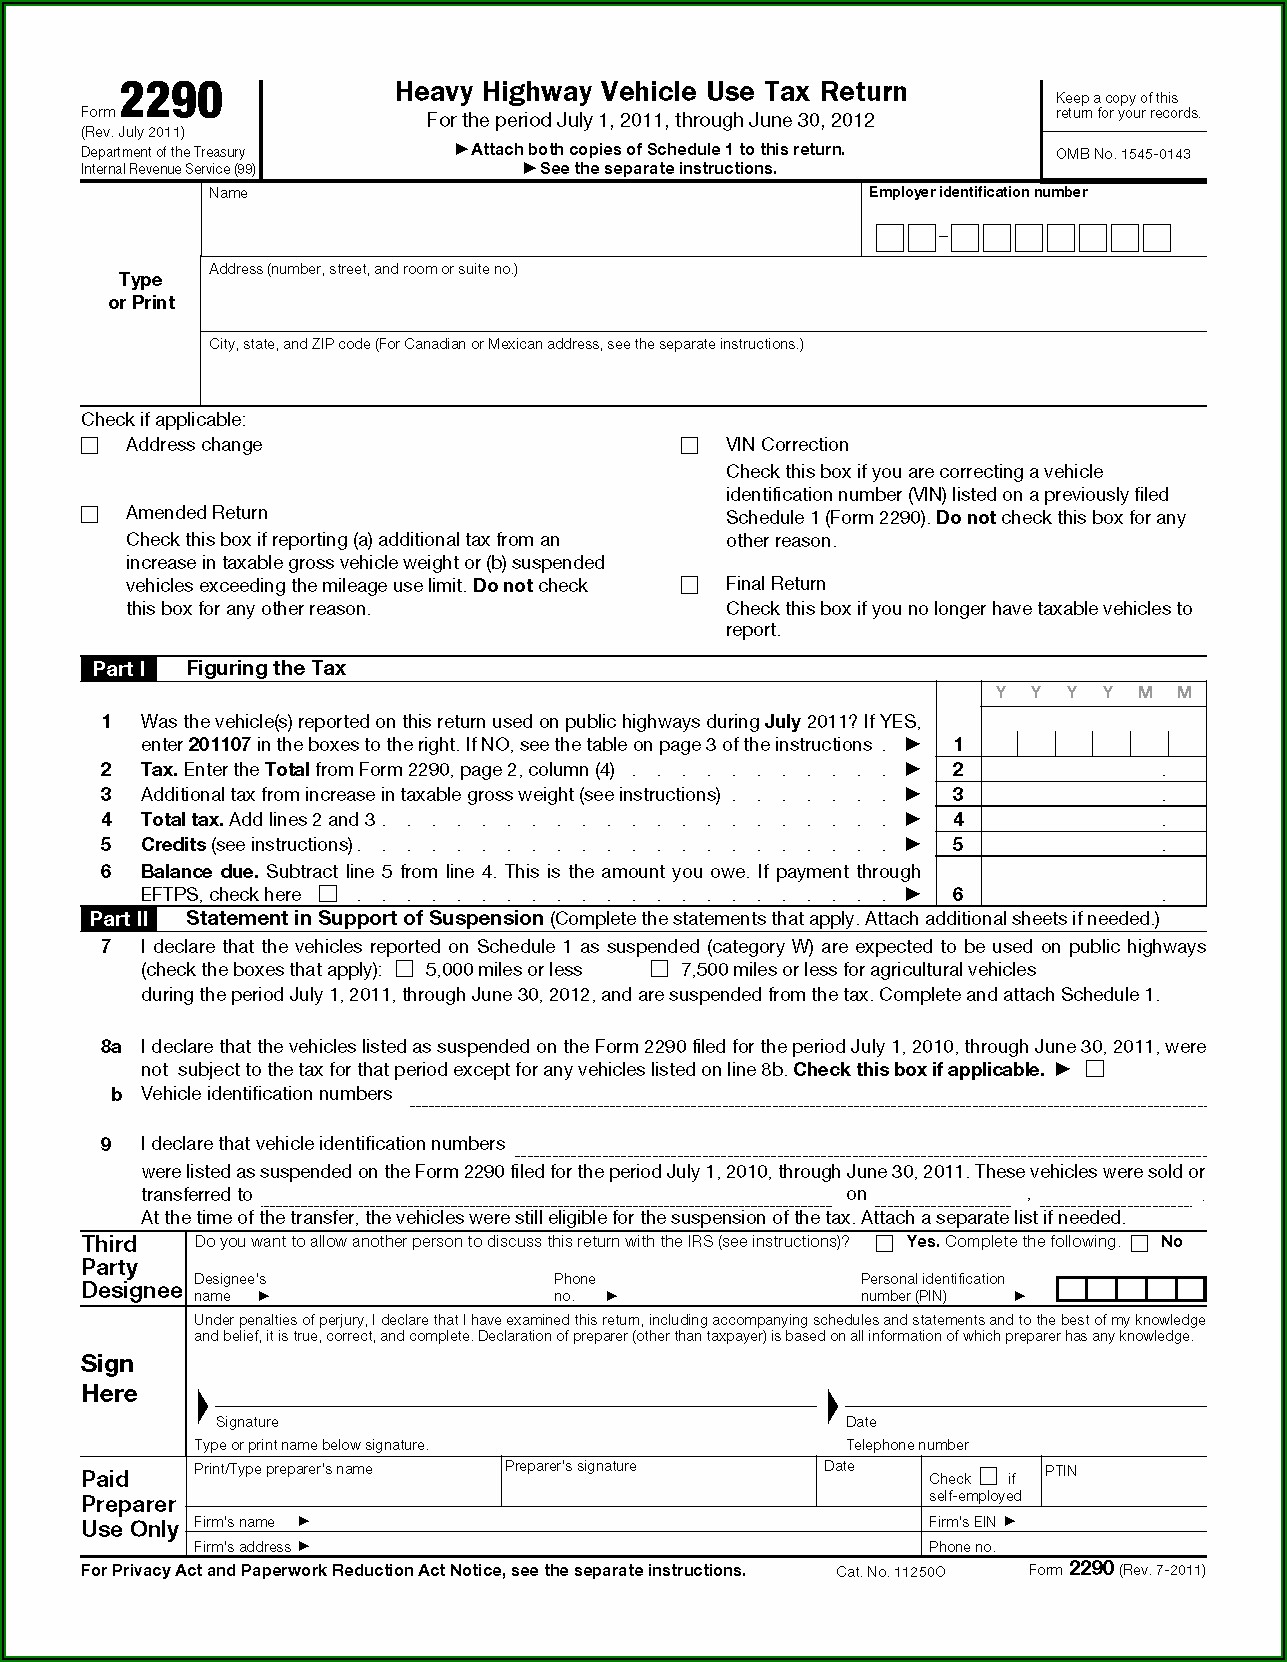 Irs Form 2290 Schedule 1 Instructions